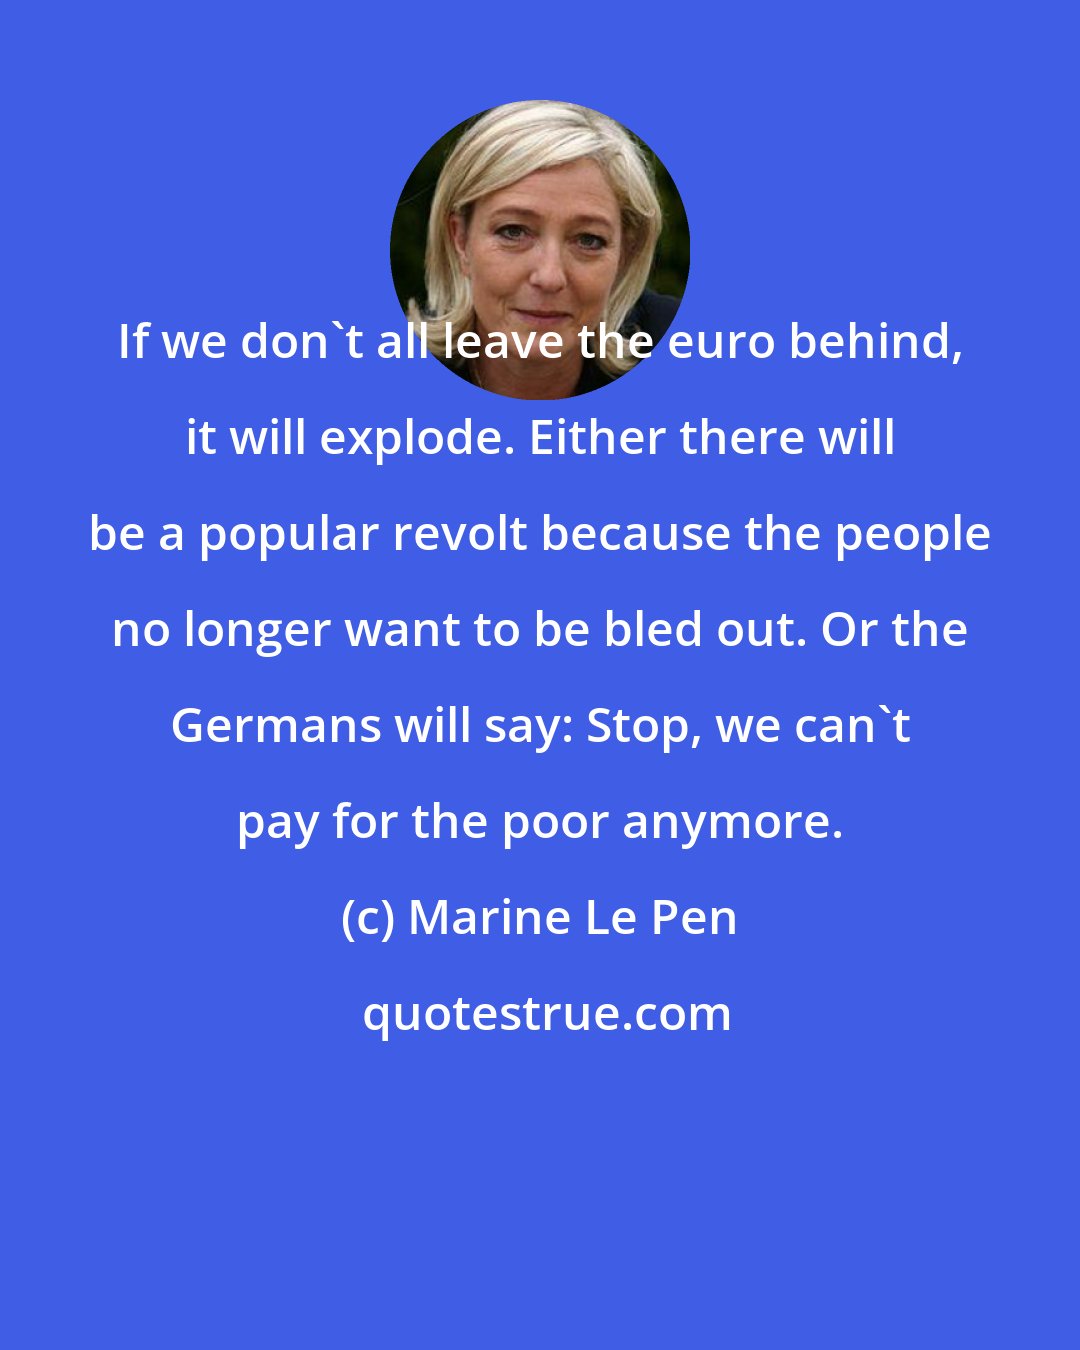 Marine Le Pen: If we don't all leave the euro behind, it will explode. Either there will be a popular revolt because the people no longer want to be bled out. Or the Germans will say: Stop, we can't pay for the poor anymore.